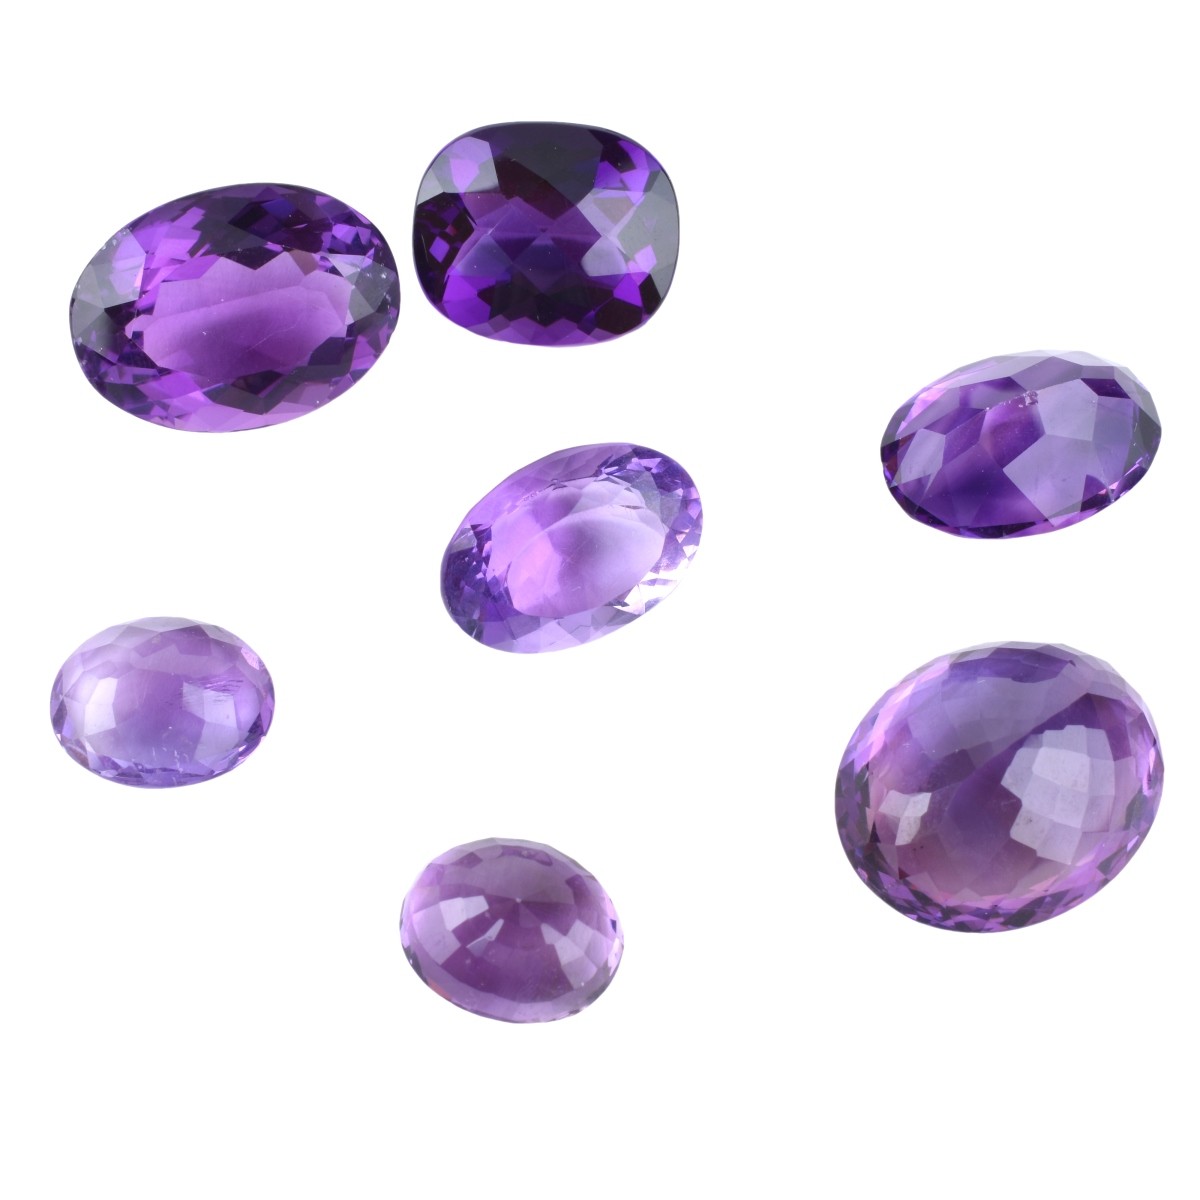 Collection of Loose Amethyst